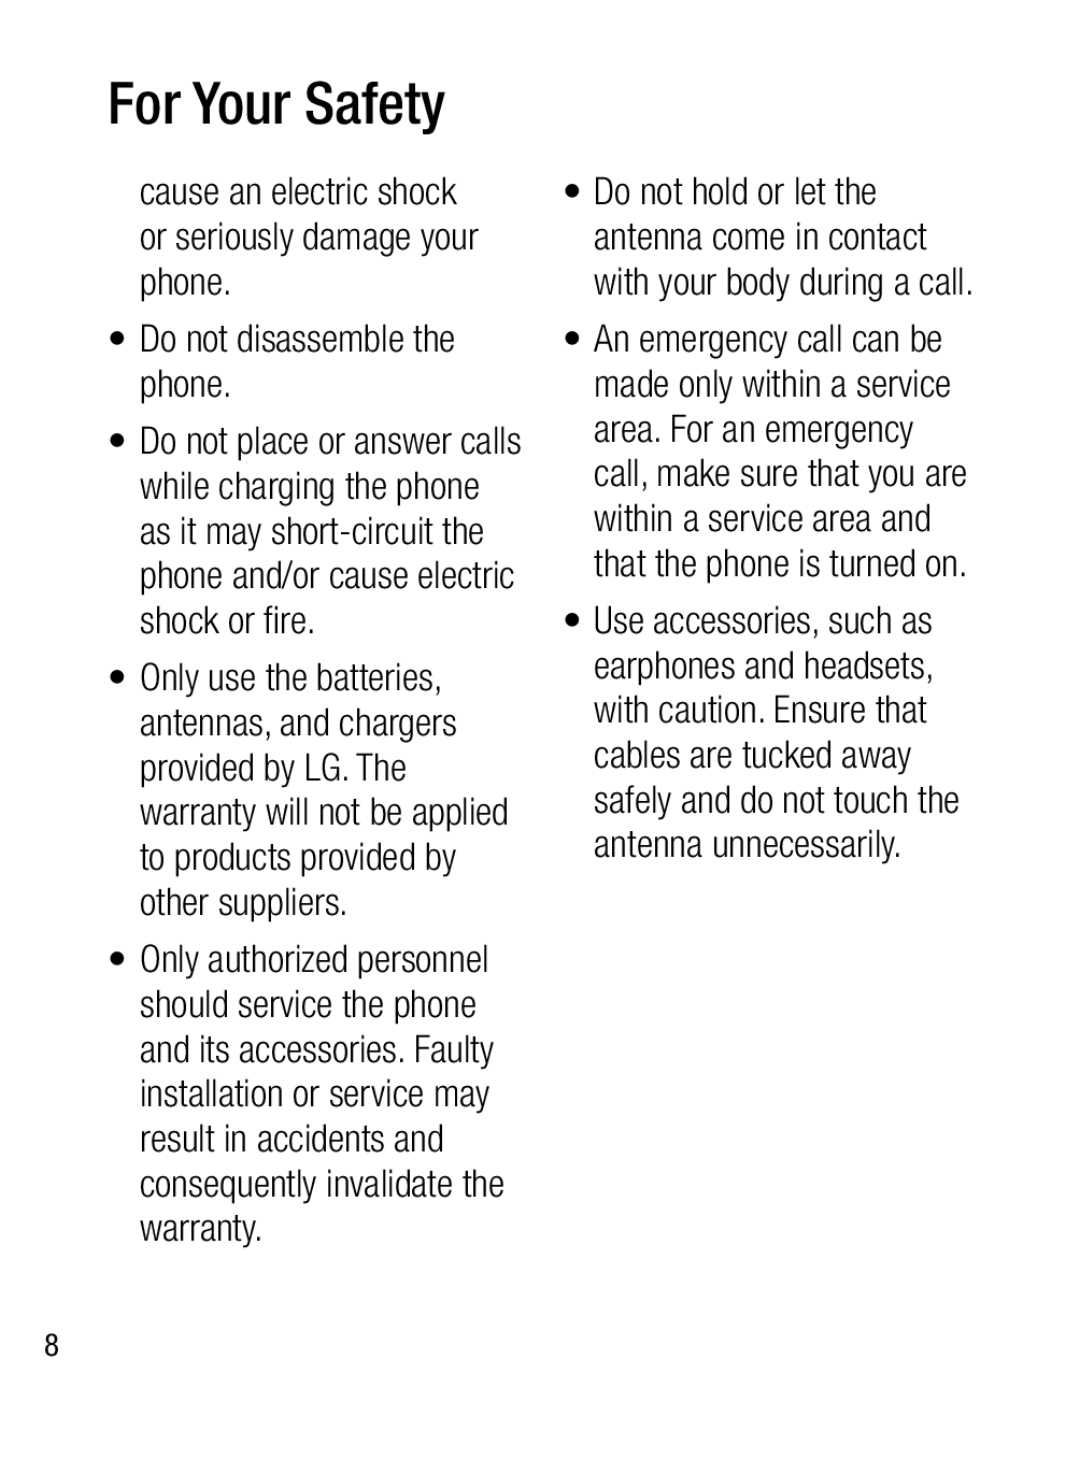 LG Electronics A133CH manual cause an electric shock or seriously damage your phone, Do not disassemble the phone 